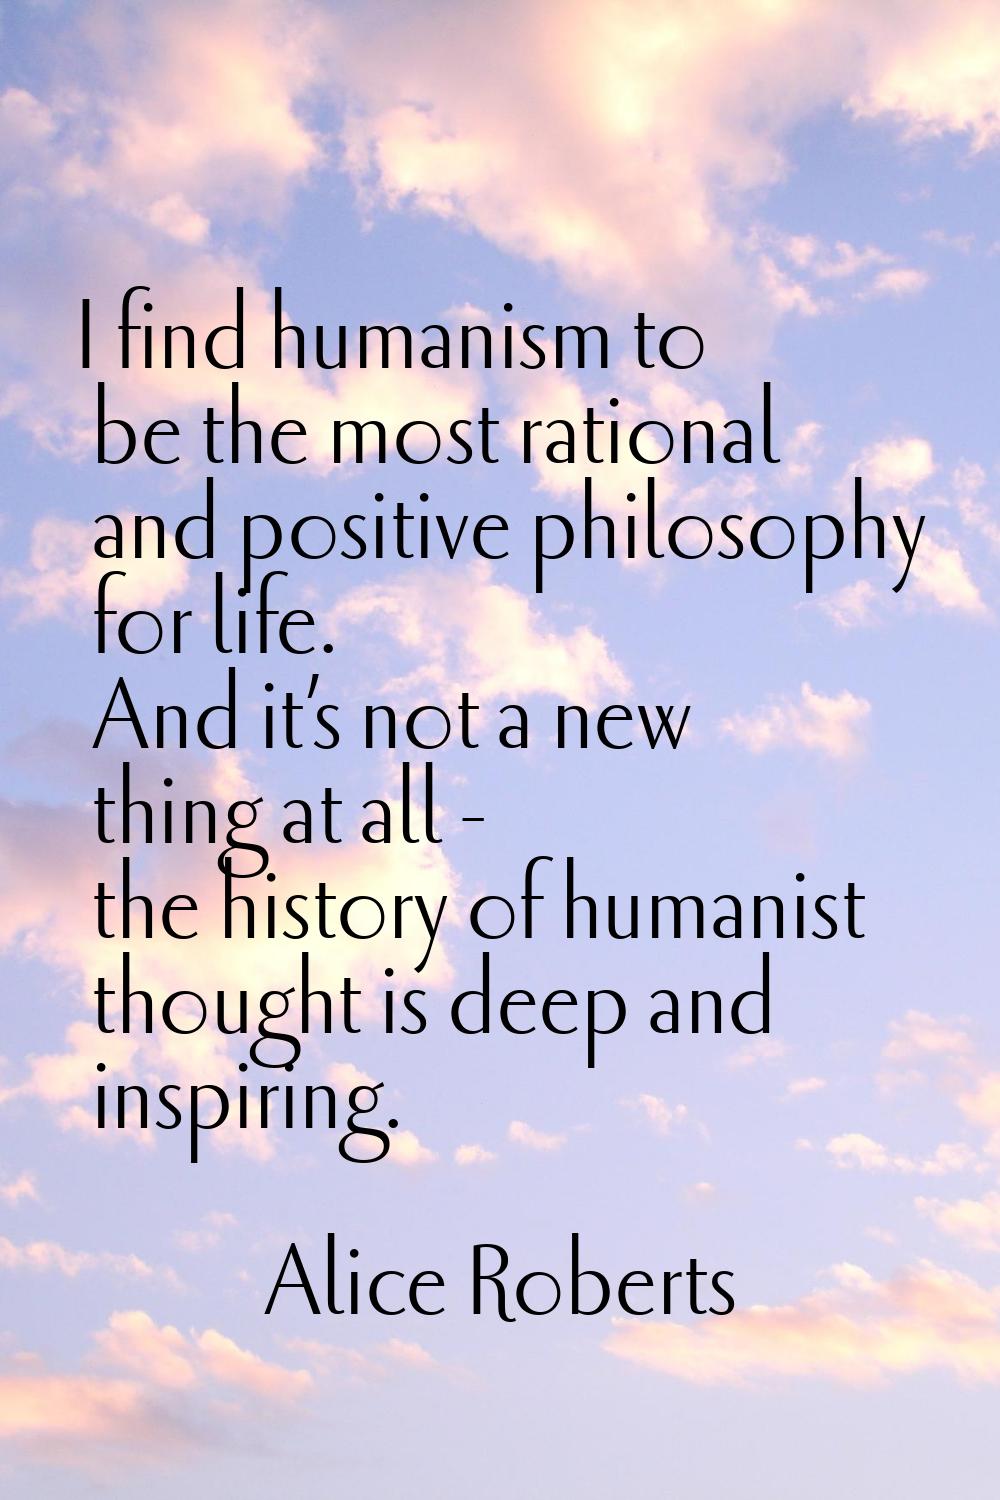 I find humanism to be the most rational and positive philosophy for life. And it’s not a new thing 